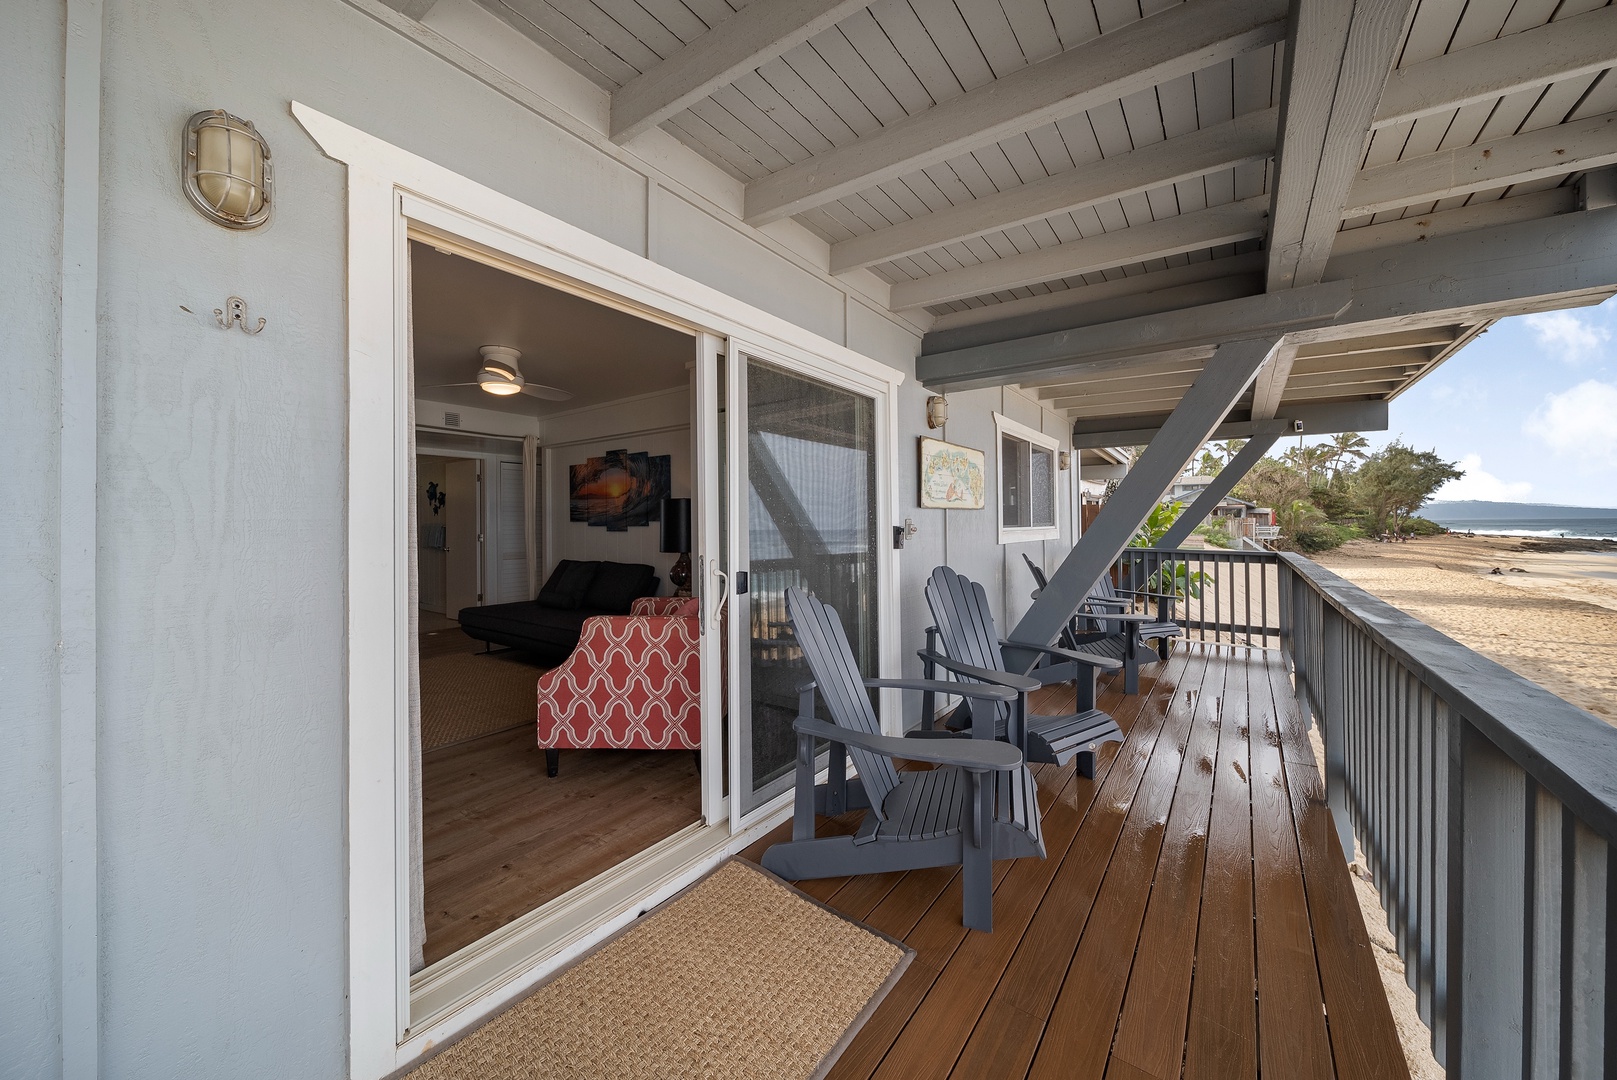 Haleiwa Vacation Rentals, Surfer's Paradise - Access to the Adirondack chairs on the deck is directly off the entertainment space